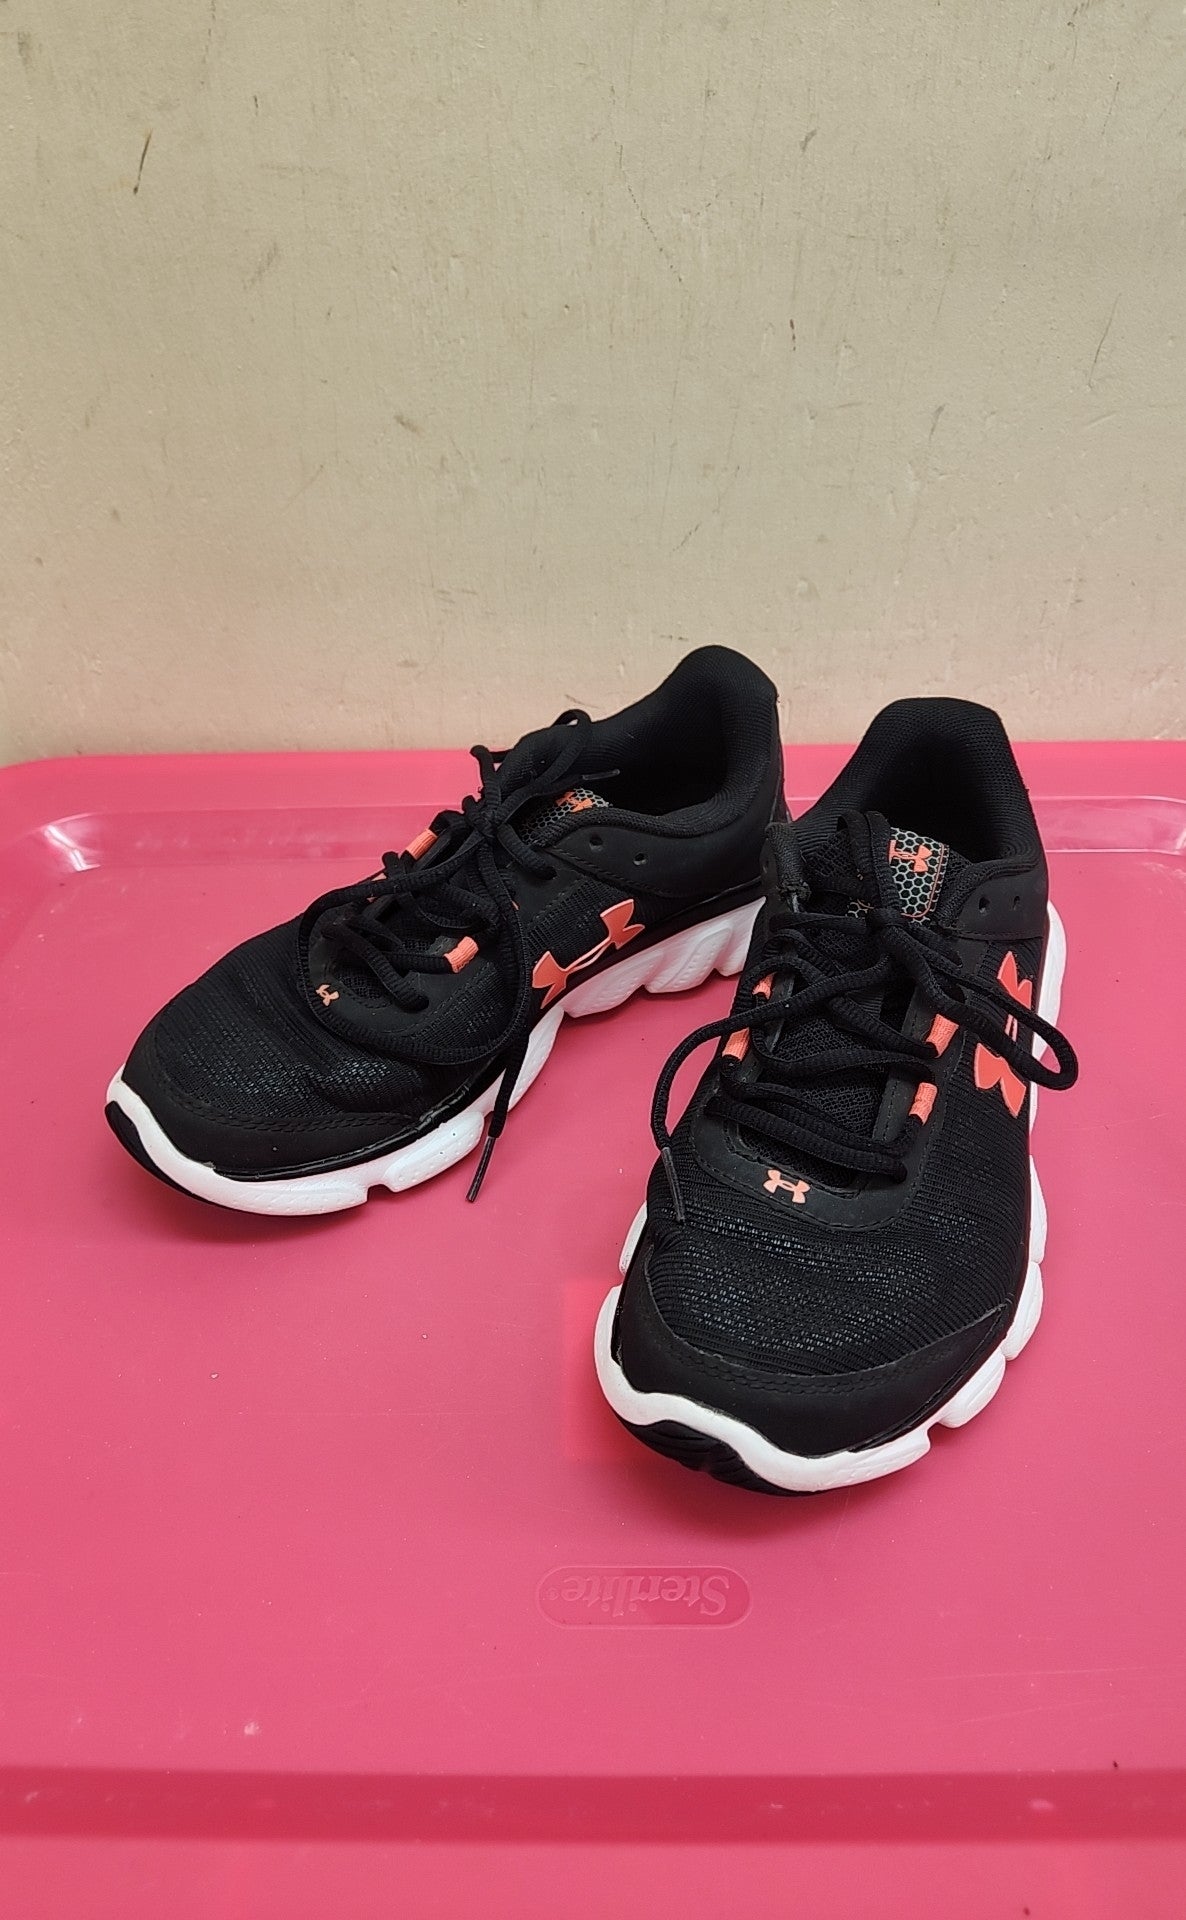 Under Armour Women's Size 7-1/2 Black Sneakers